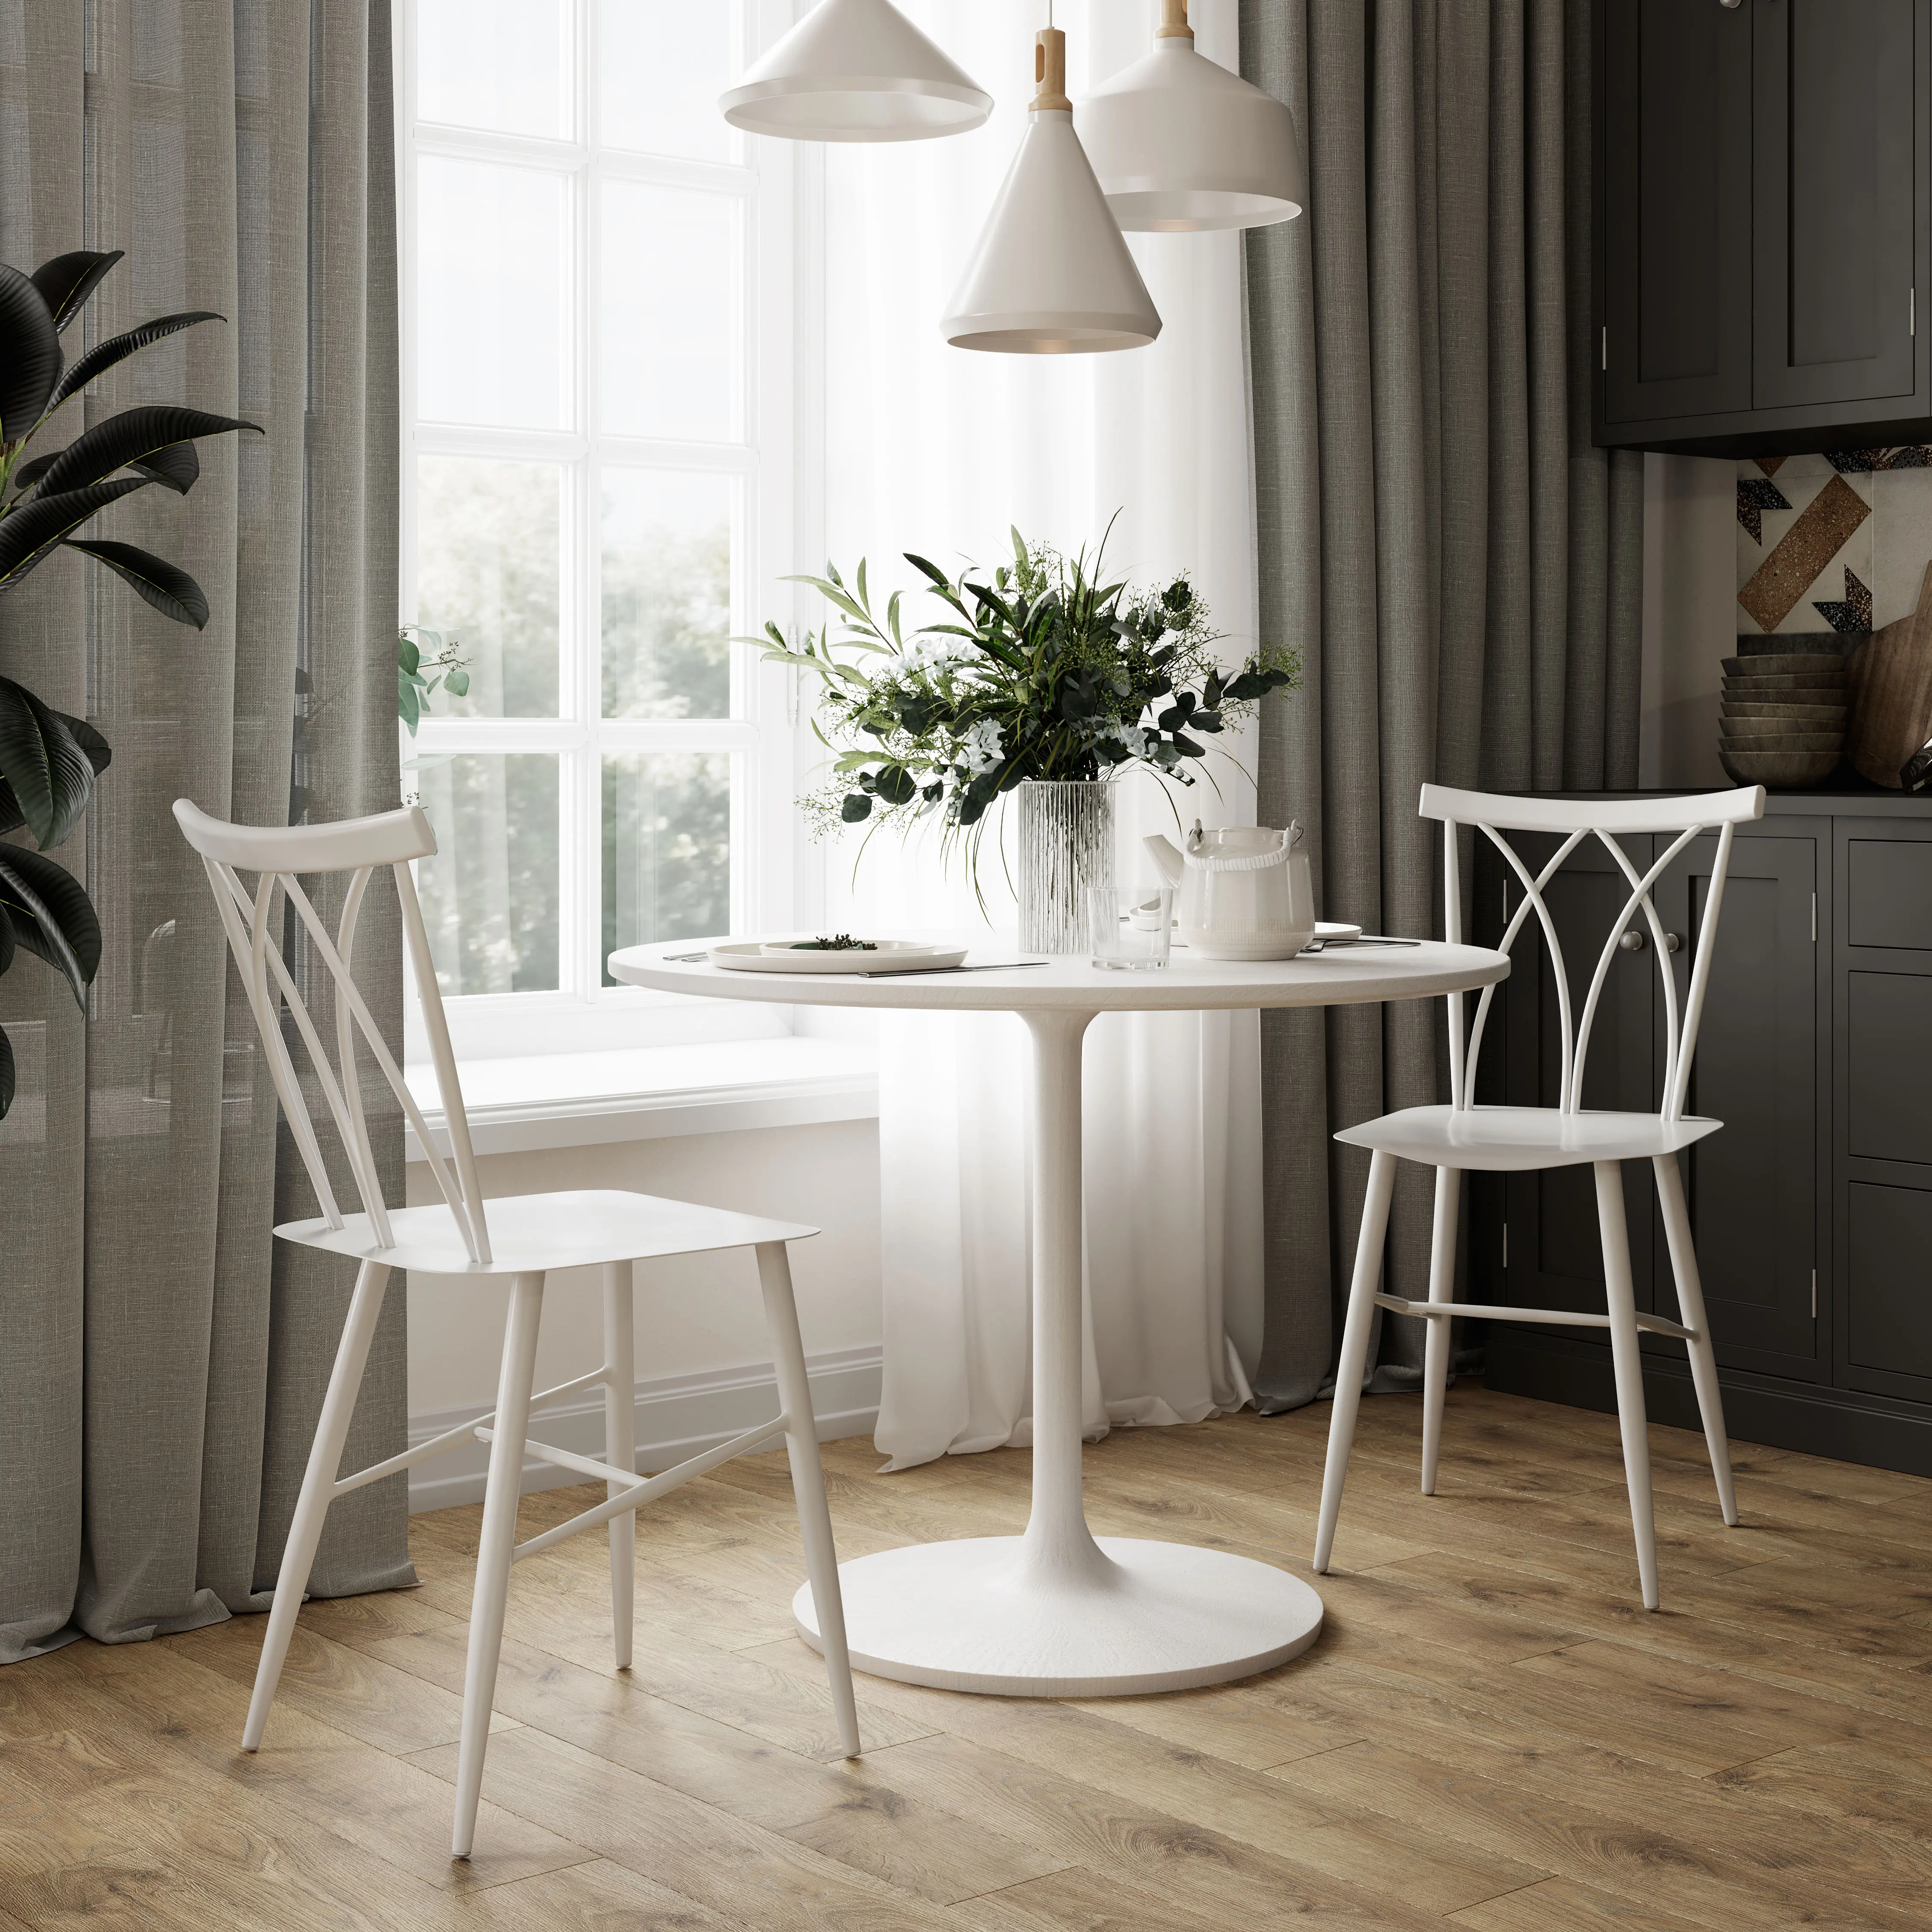 Easton White Metal Dining Room Chair (Set of 2)